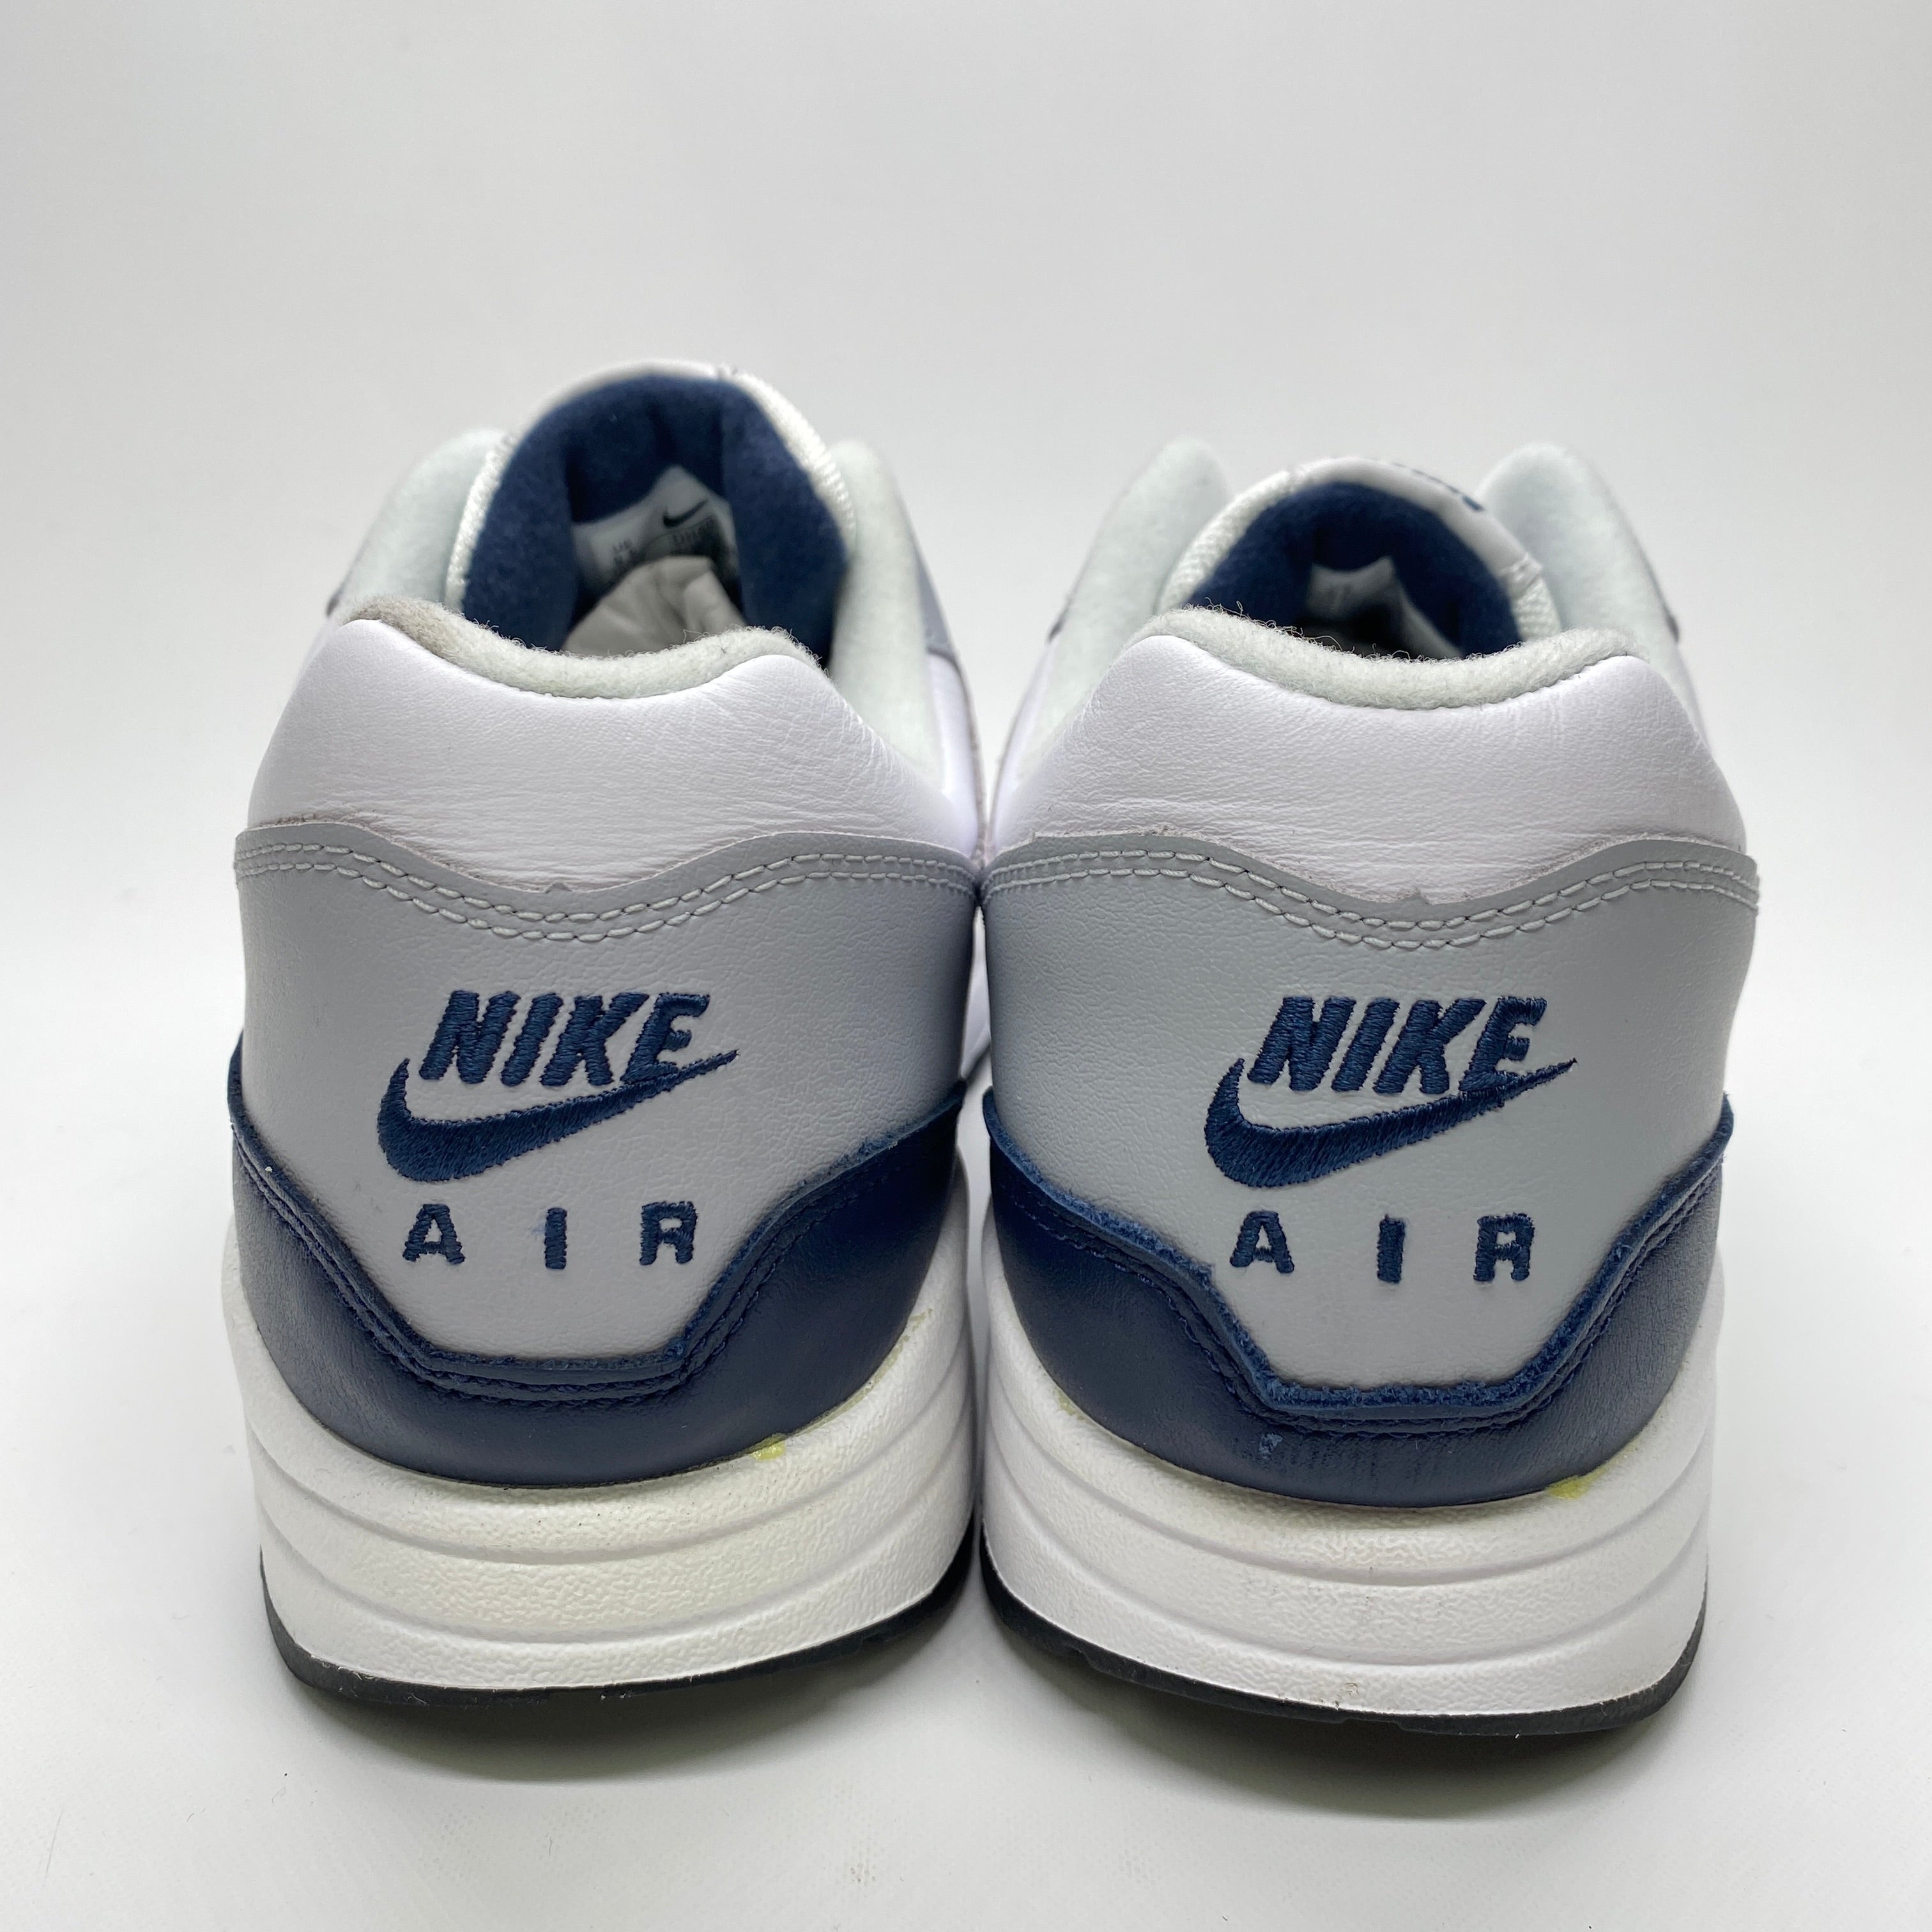 Nike Air Max 1 &quot;Obsidian&quot; 2021 Used Size 9.5